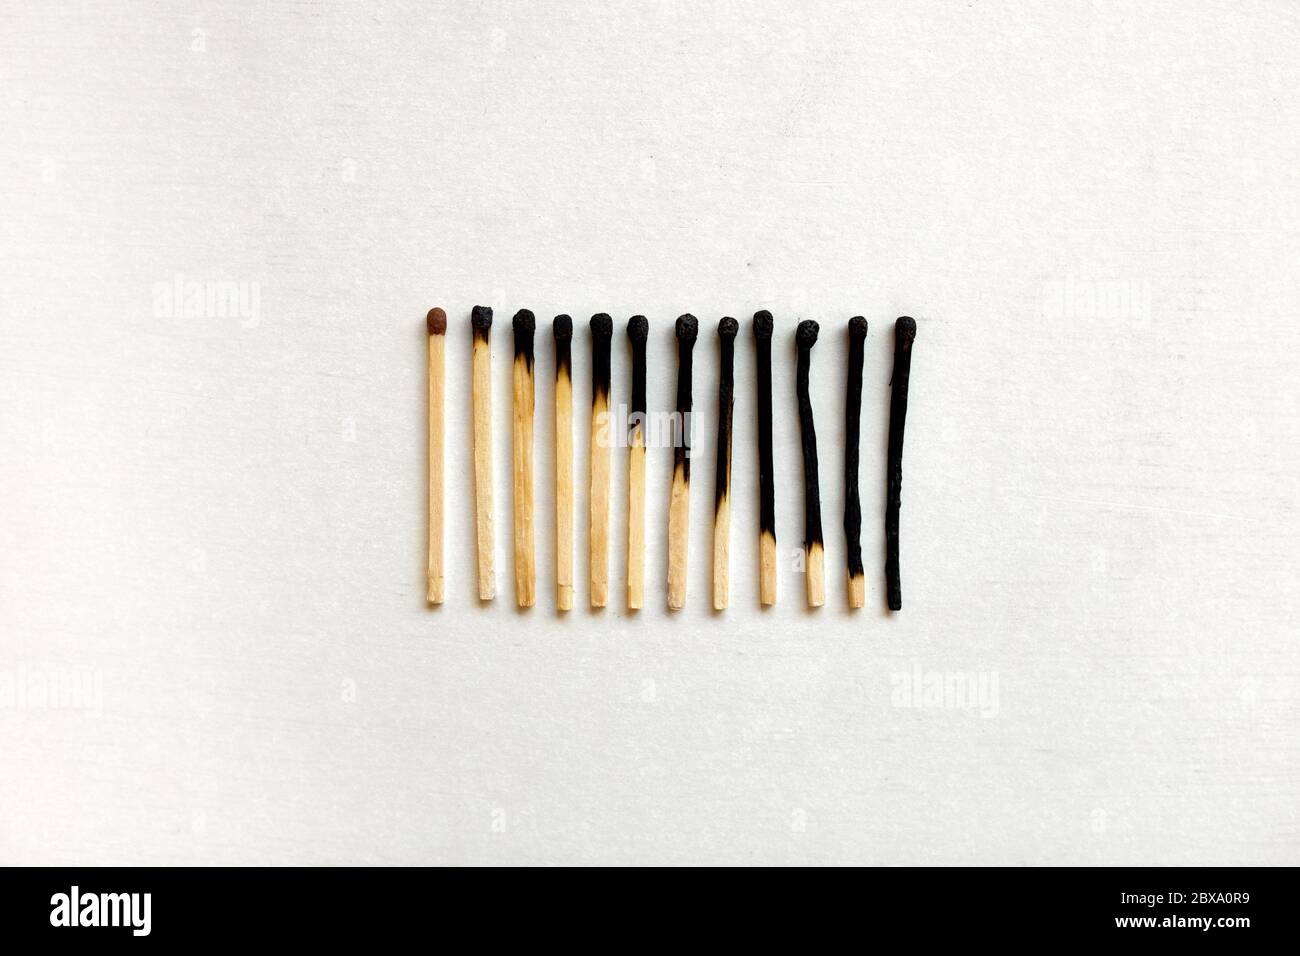 Burned matches in a row on a white background Stock Photo